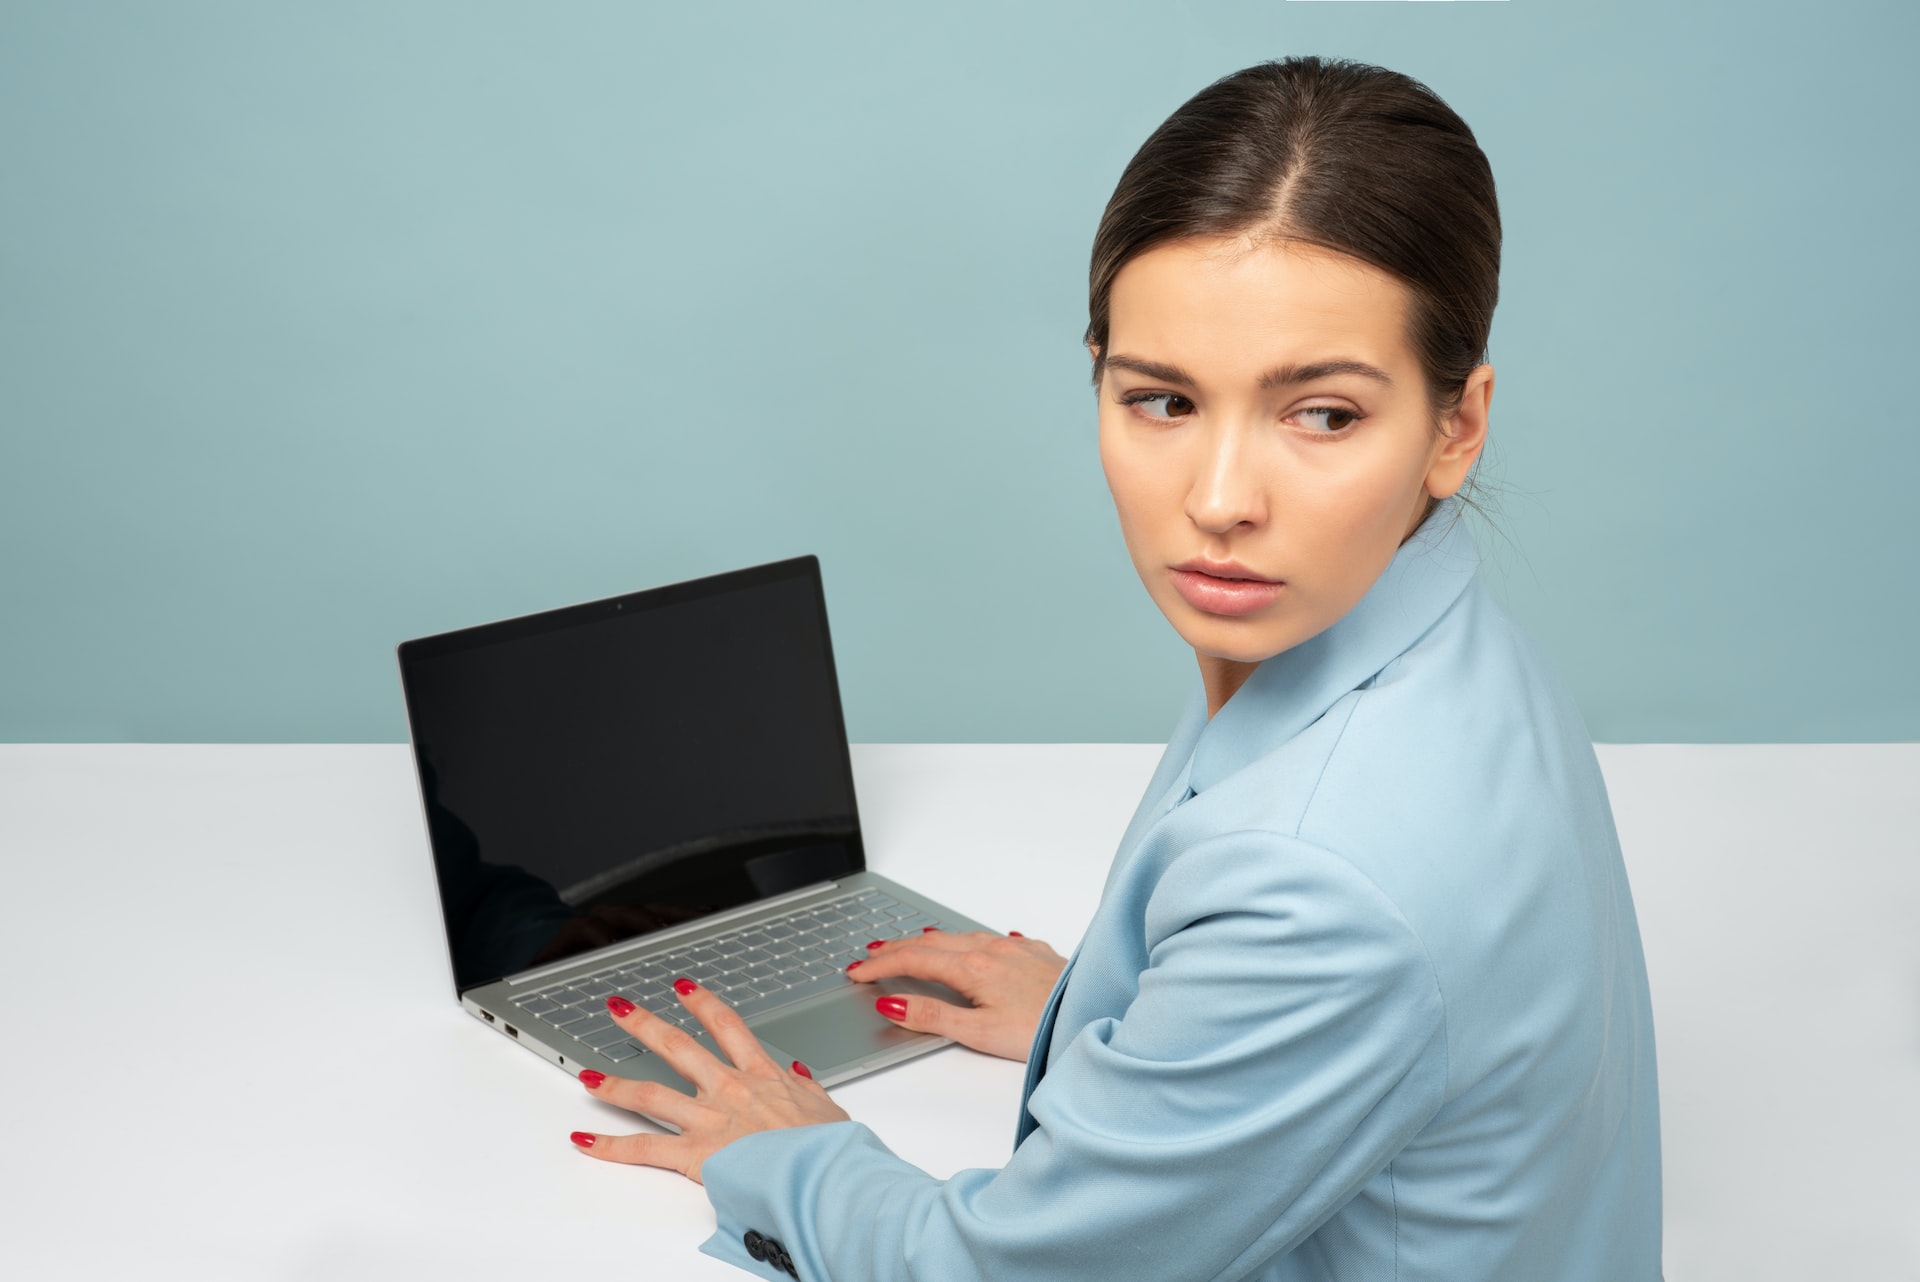 Concerned woman looking away from a laptop